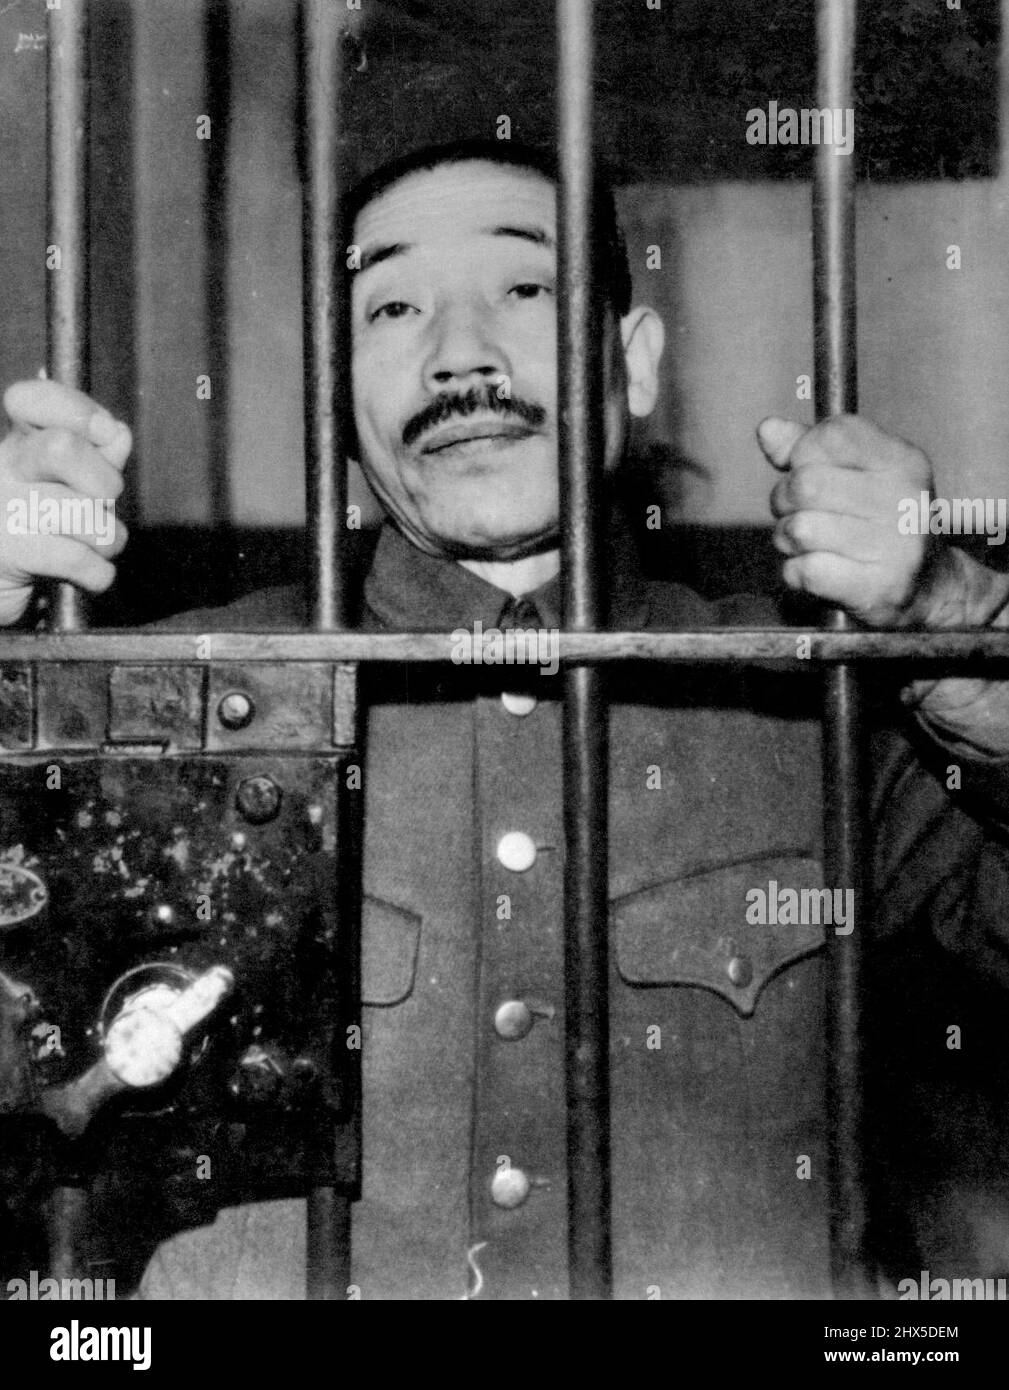 From Behind Prison bars in Shanghai, Captain Sotojiro Tatsuda awaits his trial as a war criminal. Tatsuda was identified by an American airman as the commanding officer of the firing squad which executed three of Doolittle's Tokio attack force. February 14, 1946. Stock Photo